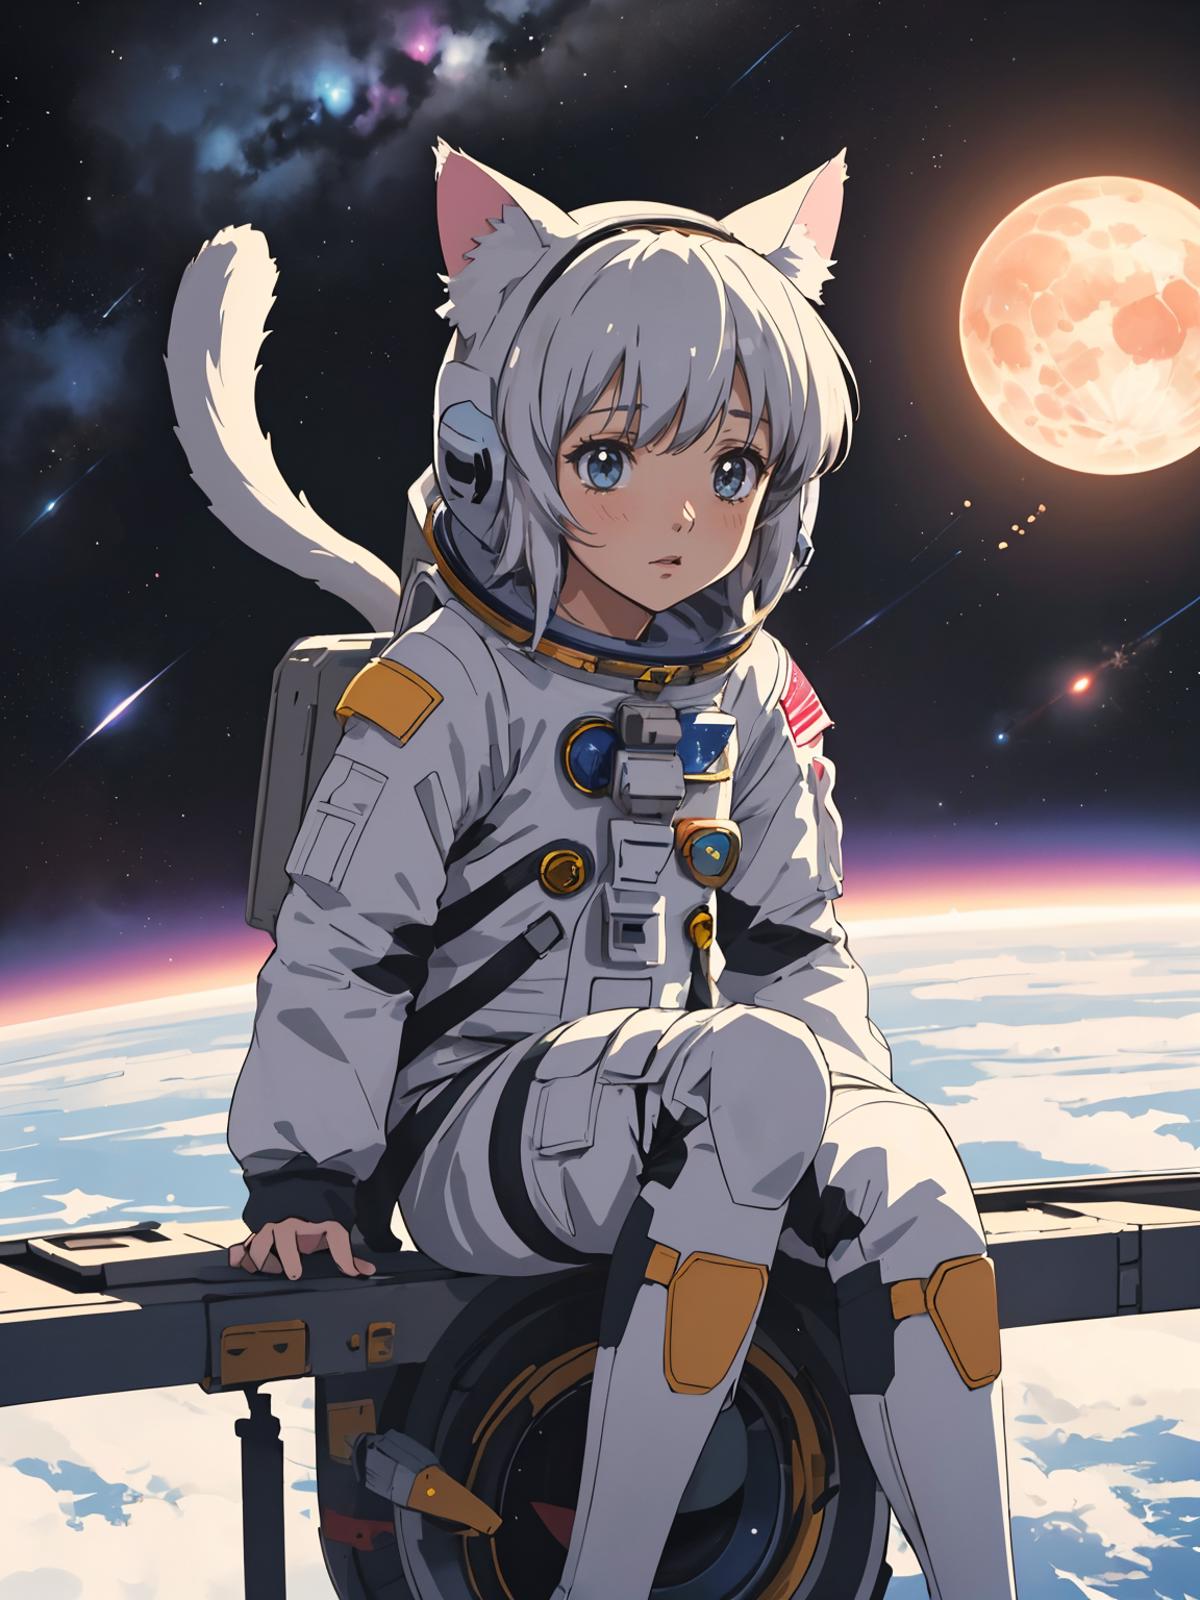 A cartoon character in a white spacesuit is sitting on a spaceship, looking at the moon.